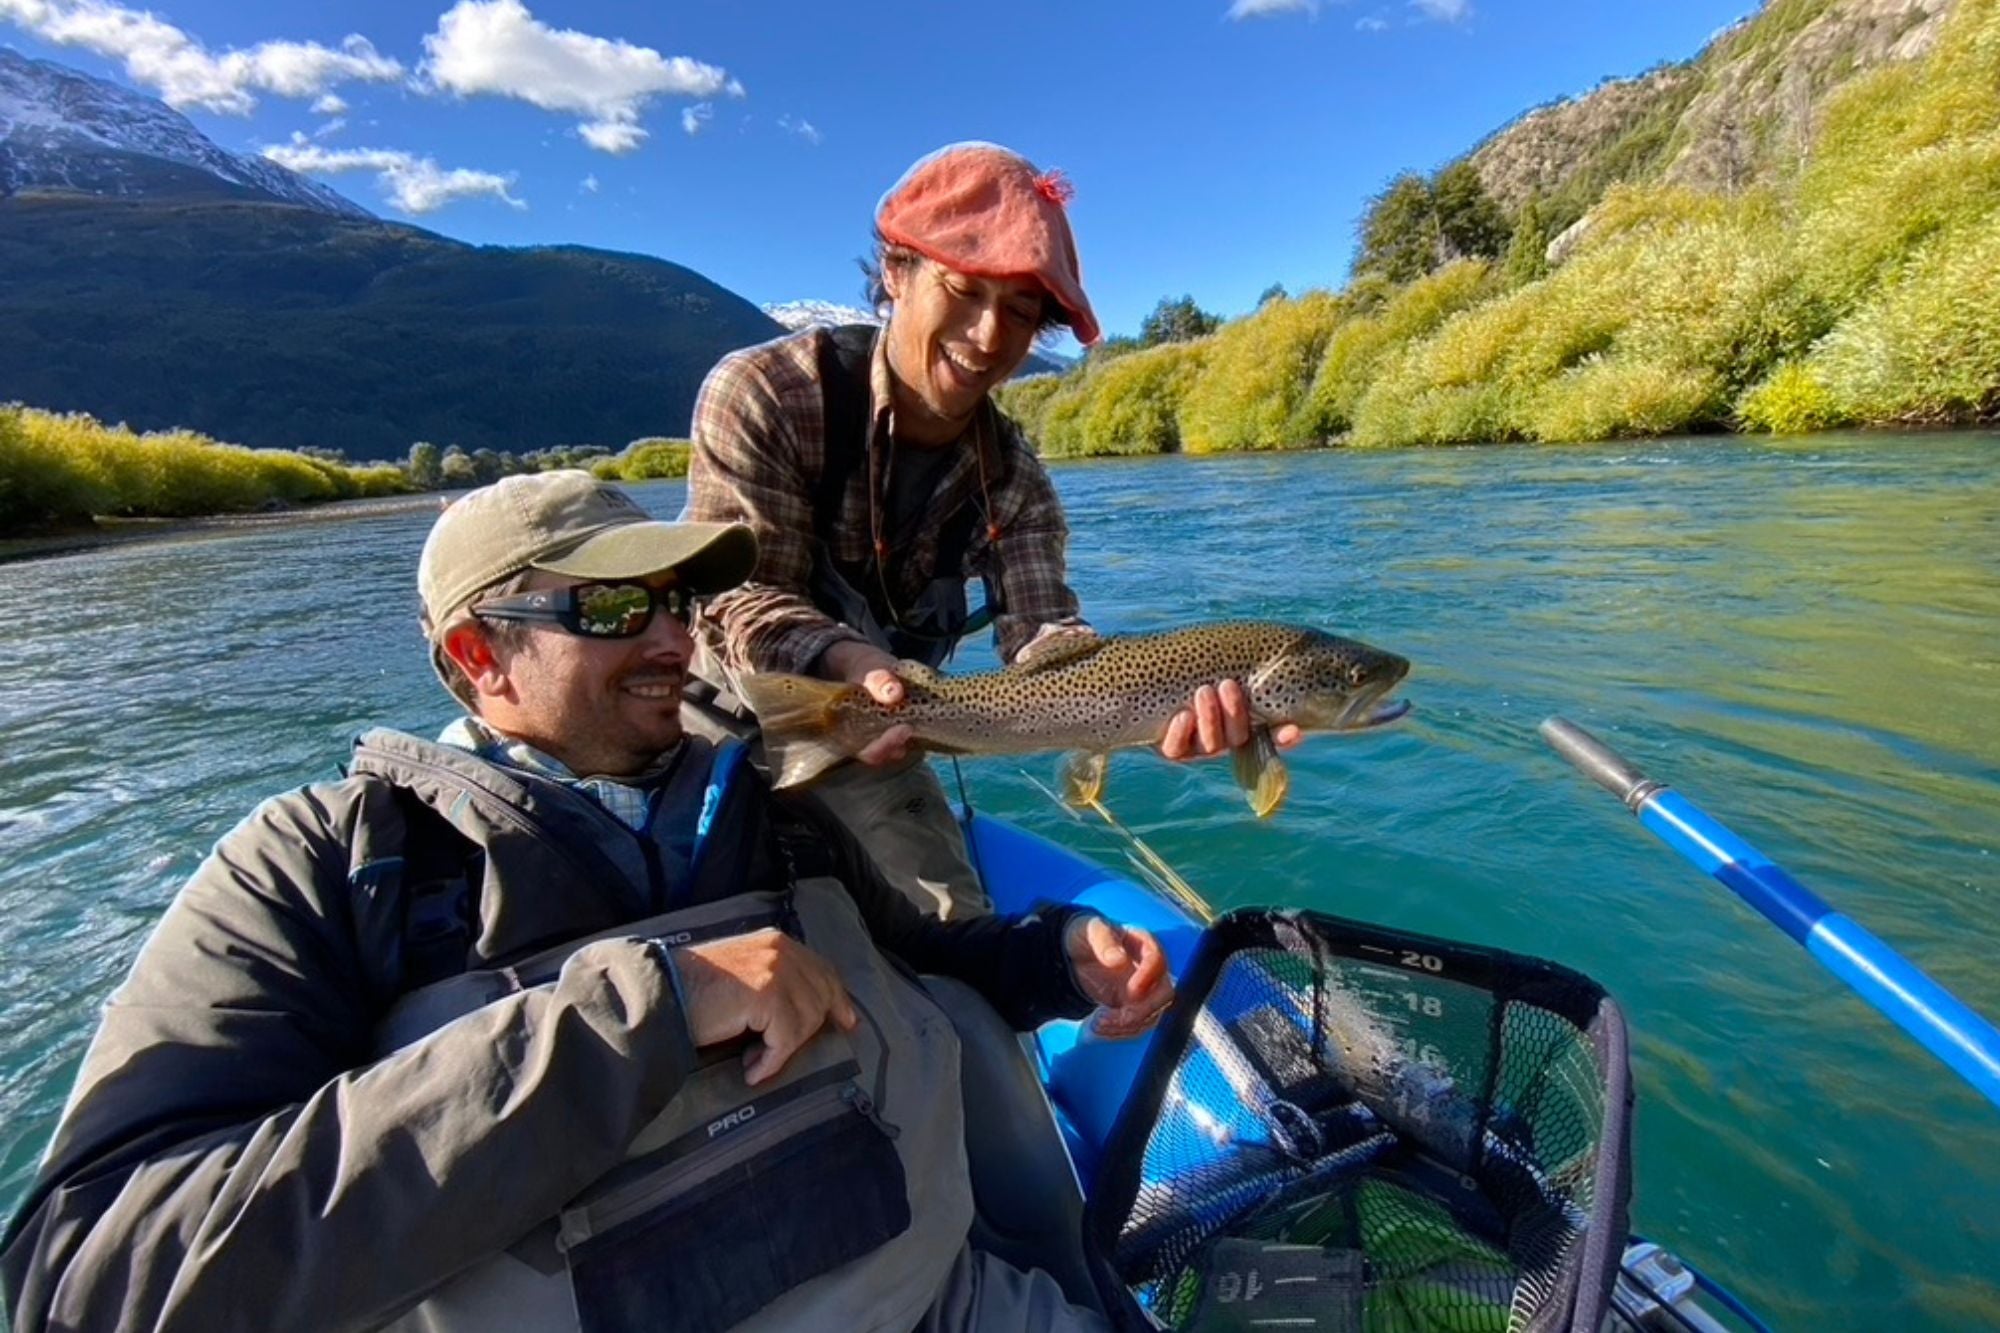 Argentine Trout Fishing: A Fly Fisherman's Guide to Patagonia [Book]